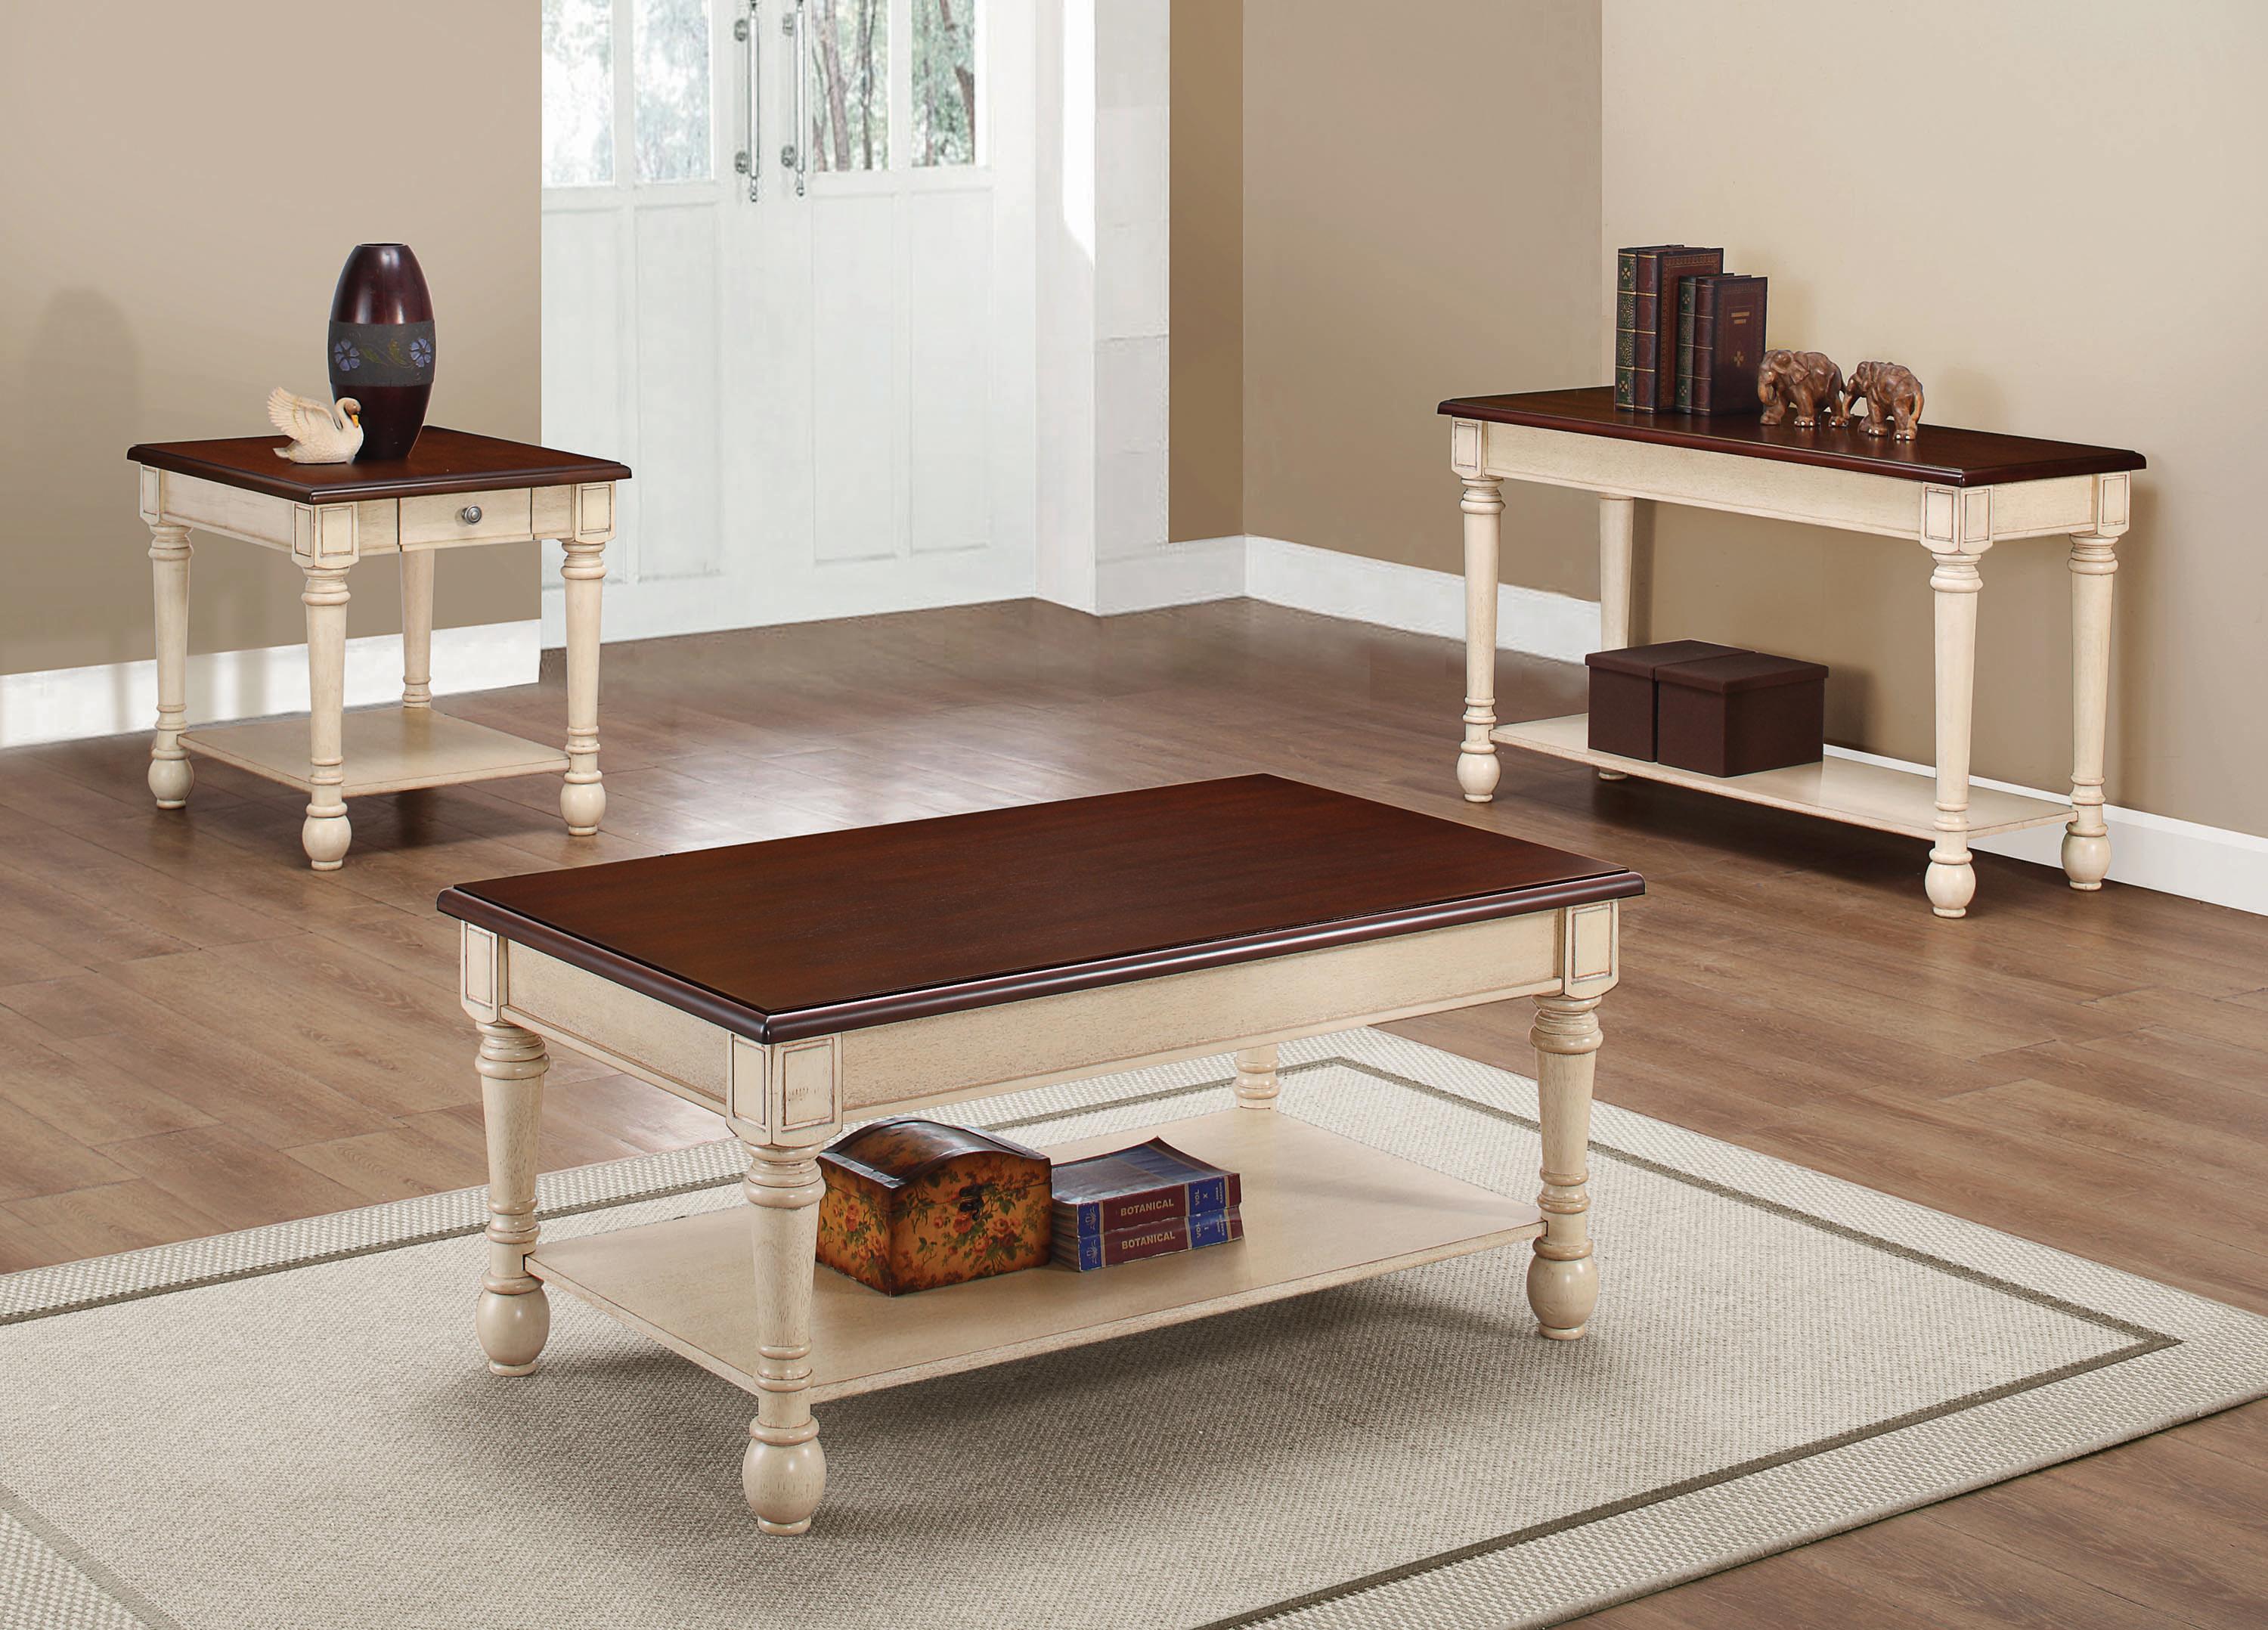 Transitional Coffee Table Set 704418-S2 704418-S2 in Dark Cherry, Antique White 